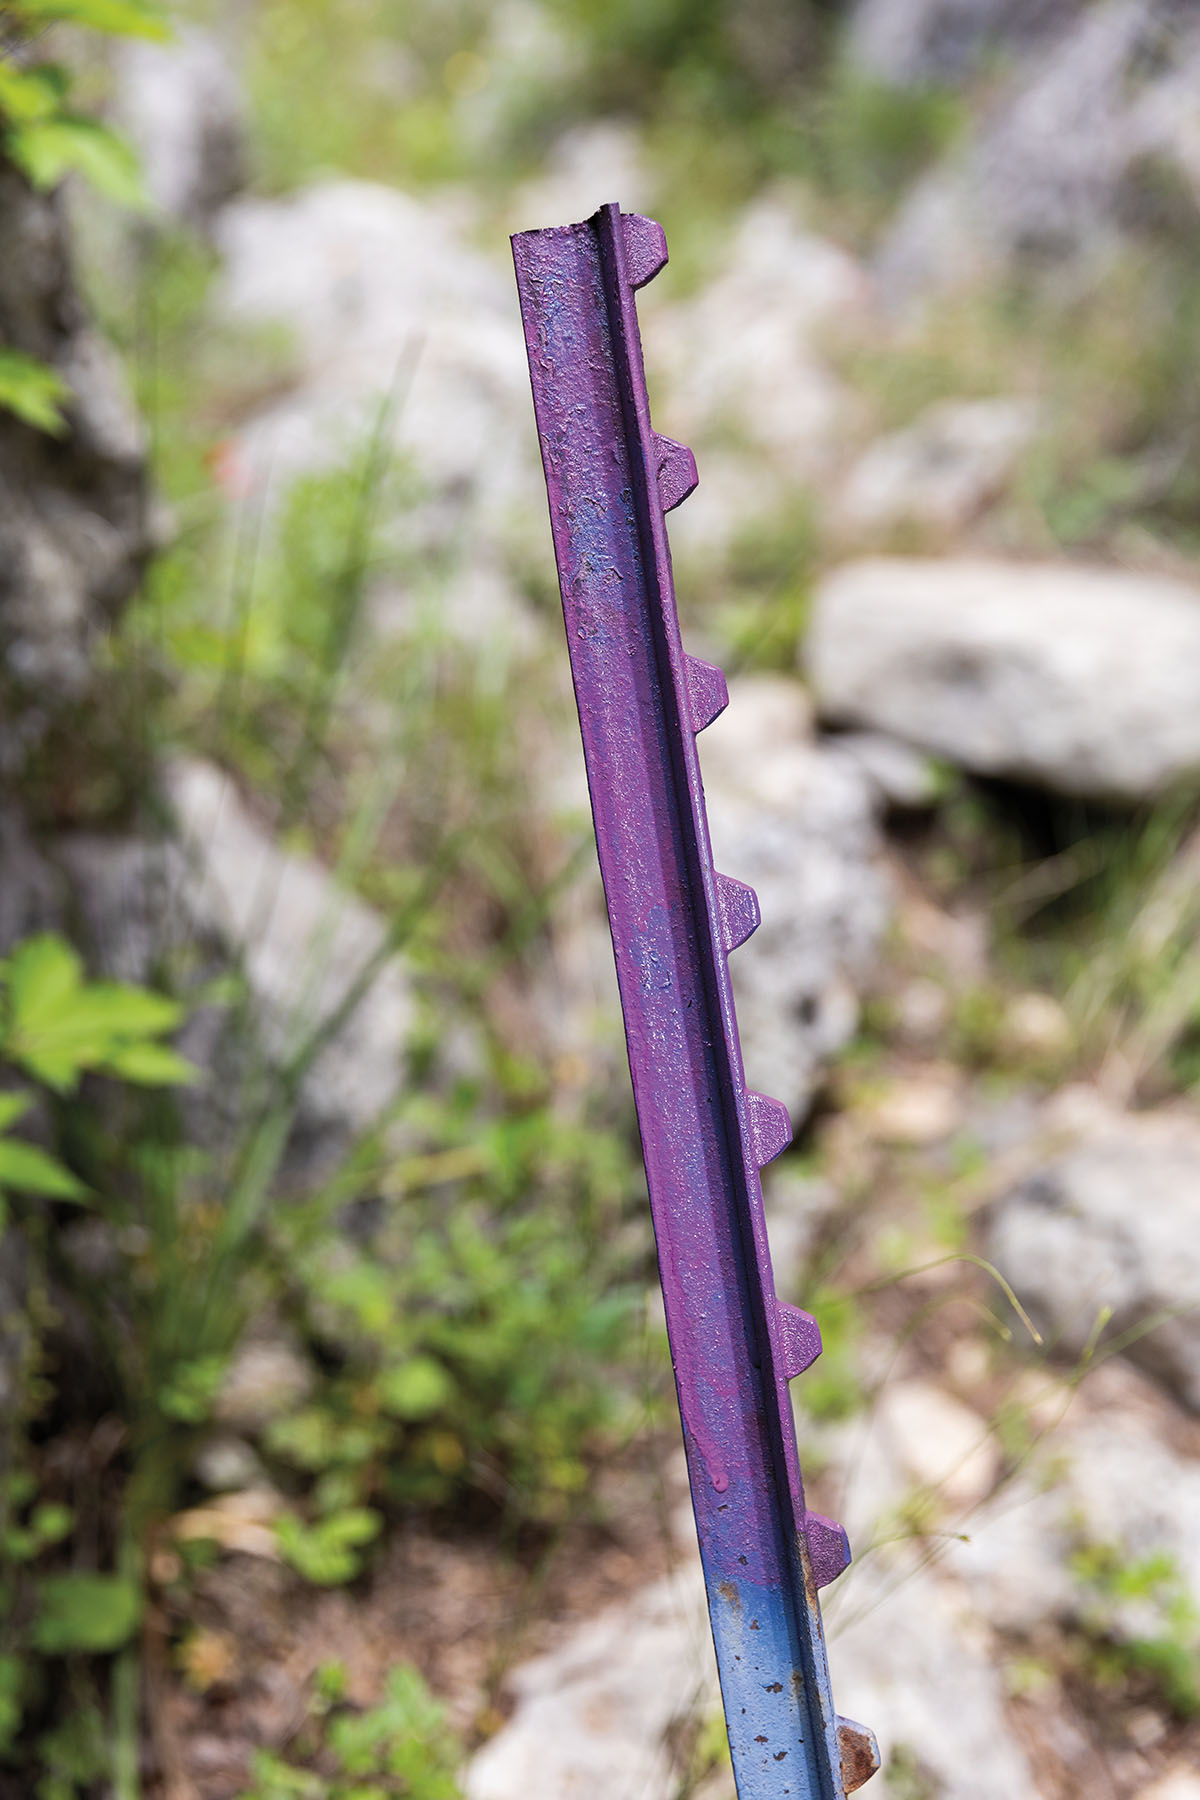 A purple-painted metal pole in a brushy natural environment